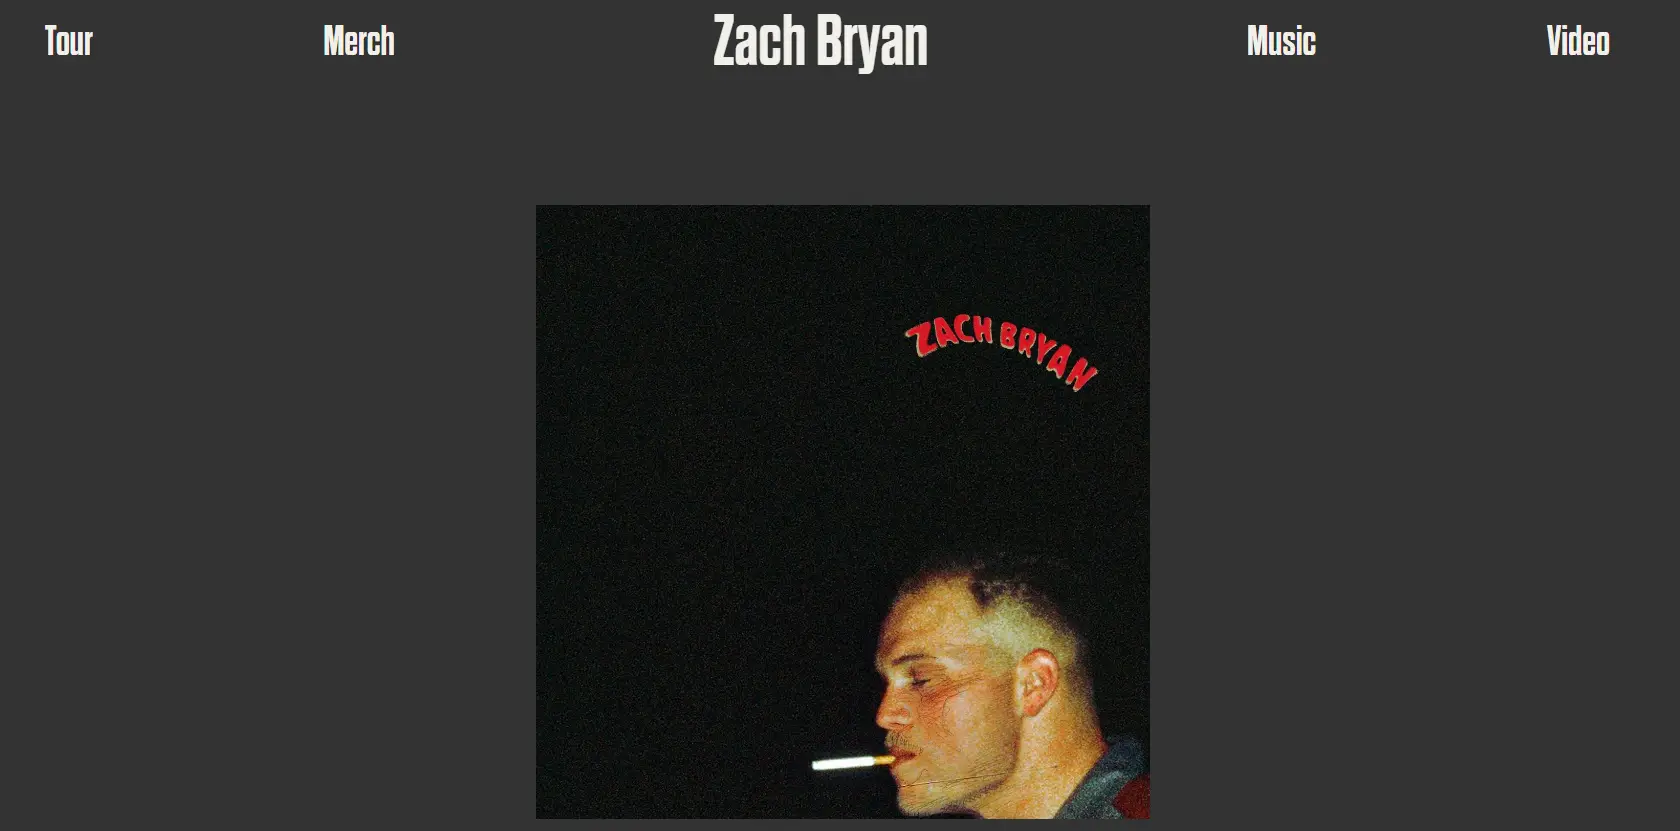 Why Are Zach Bryan Tickets So Expensive?